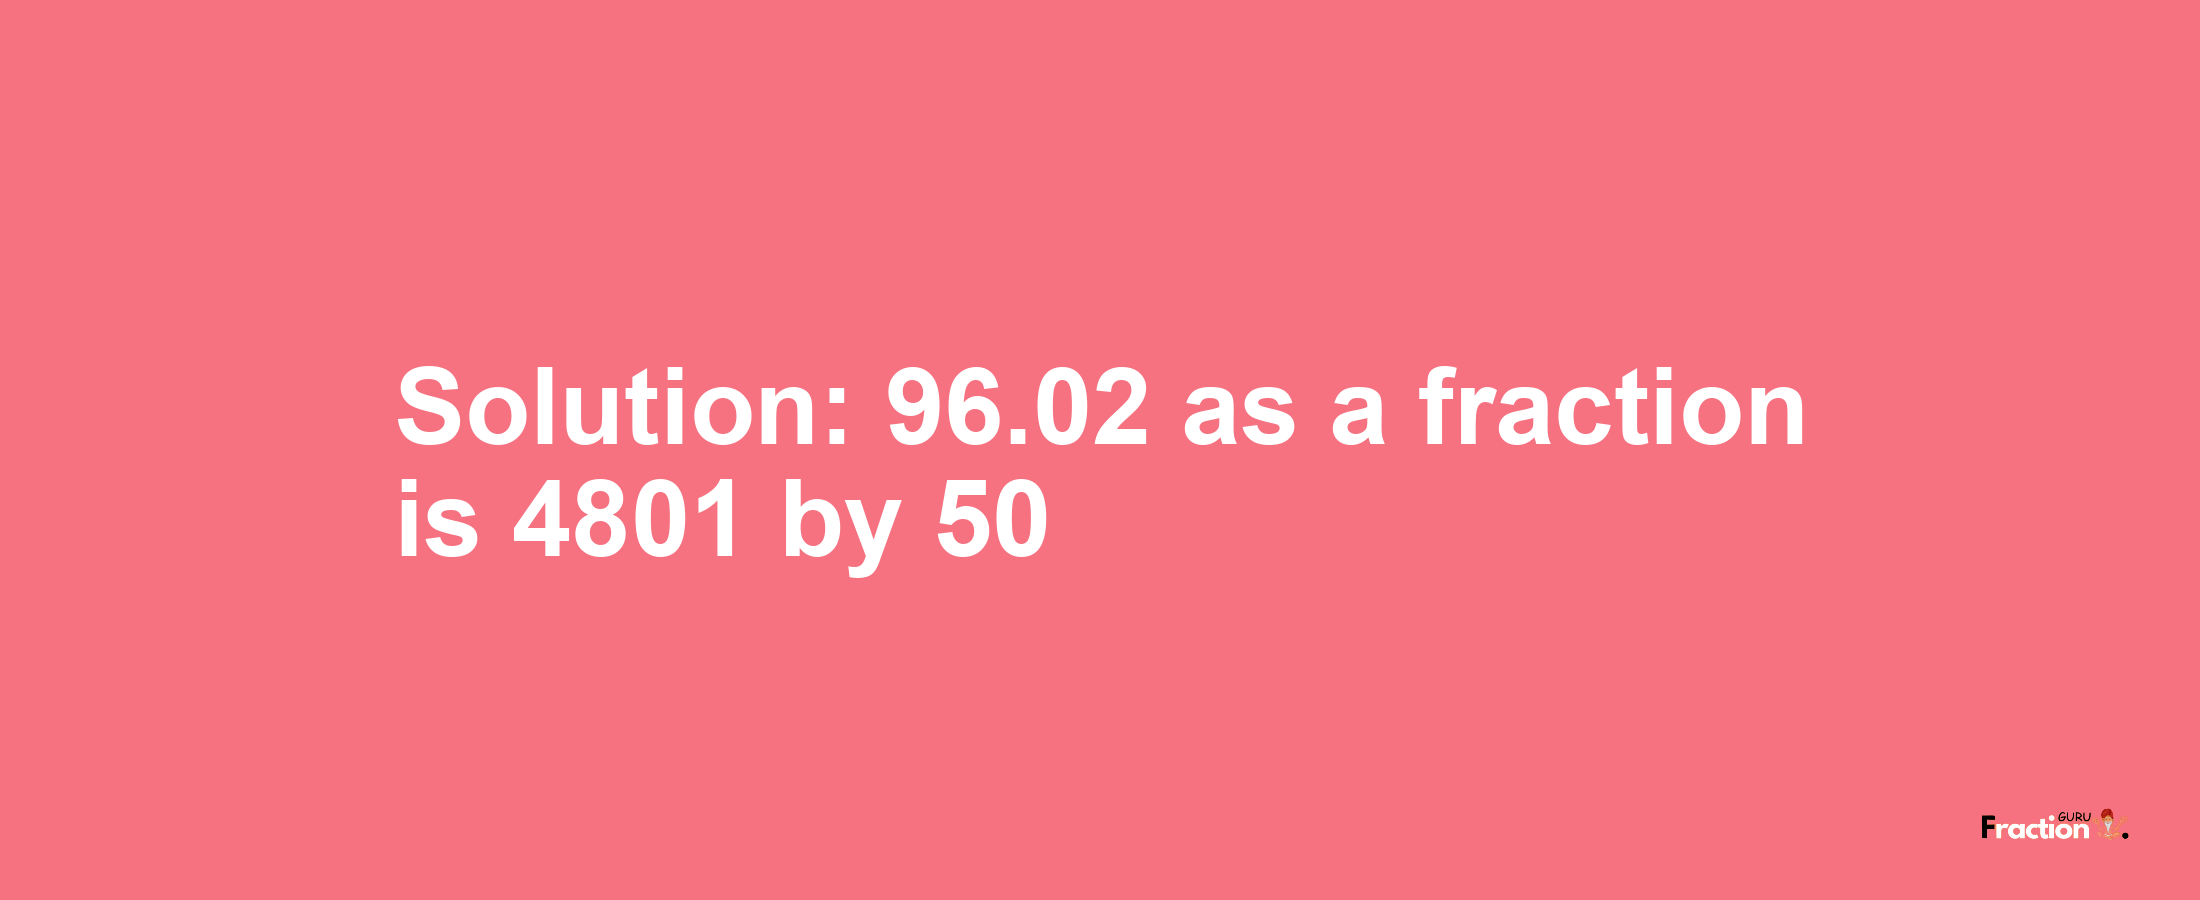 Solution:96.02 as a fraction is 4801/50